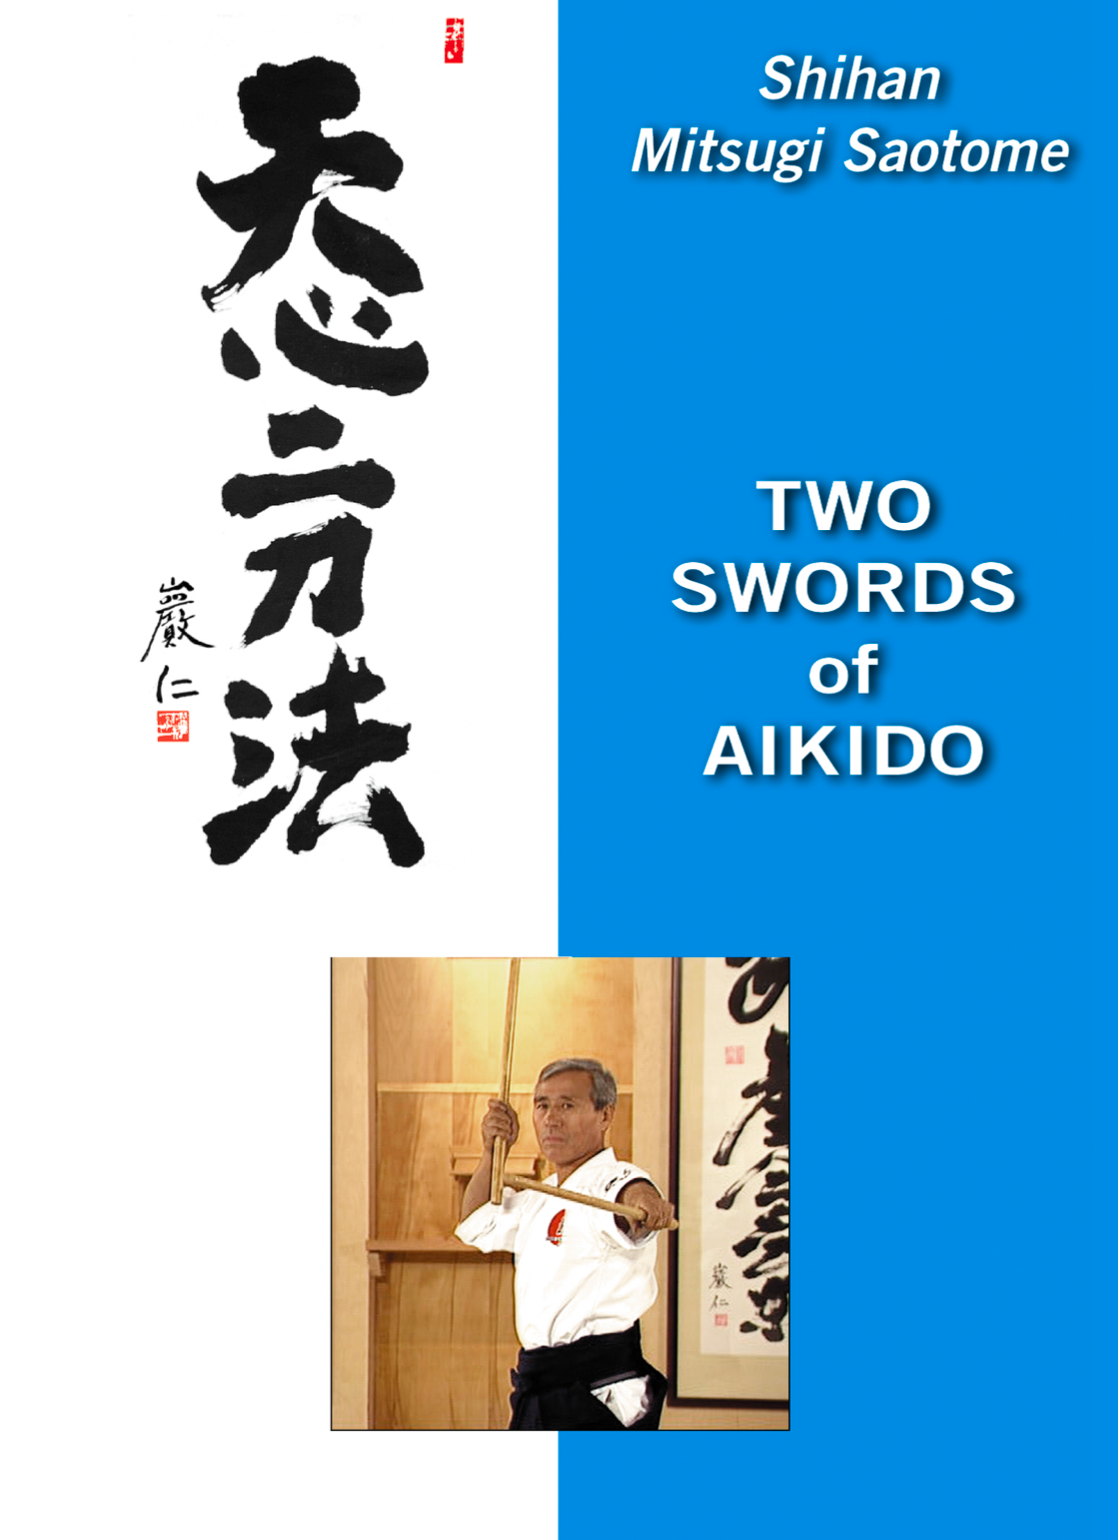 Two Swords of Aikido DVD by Mitsugi Saotome